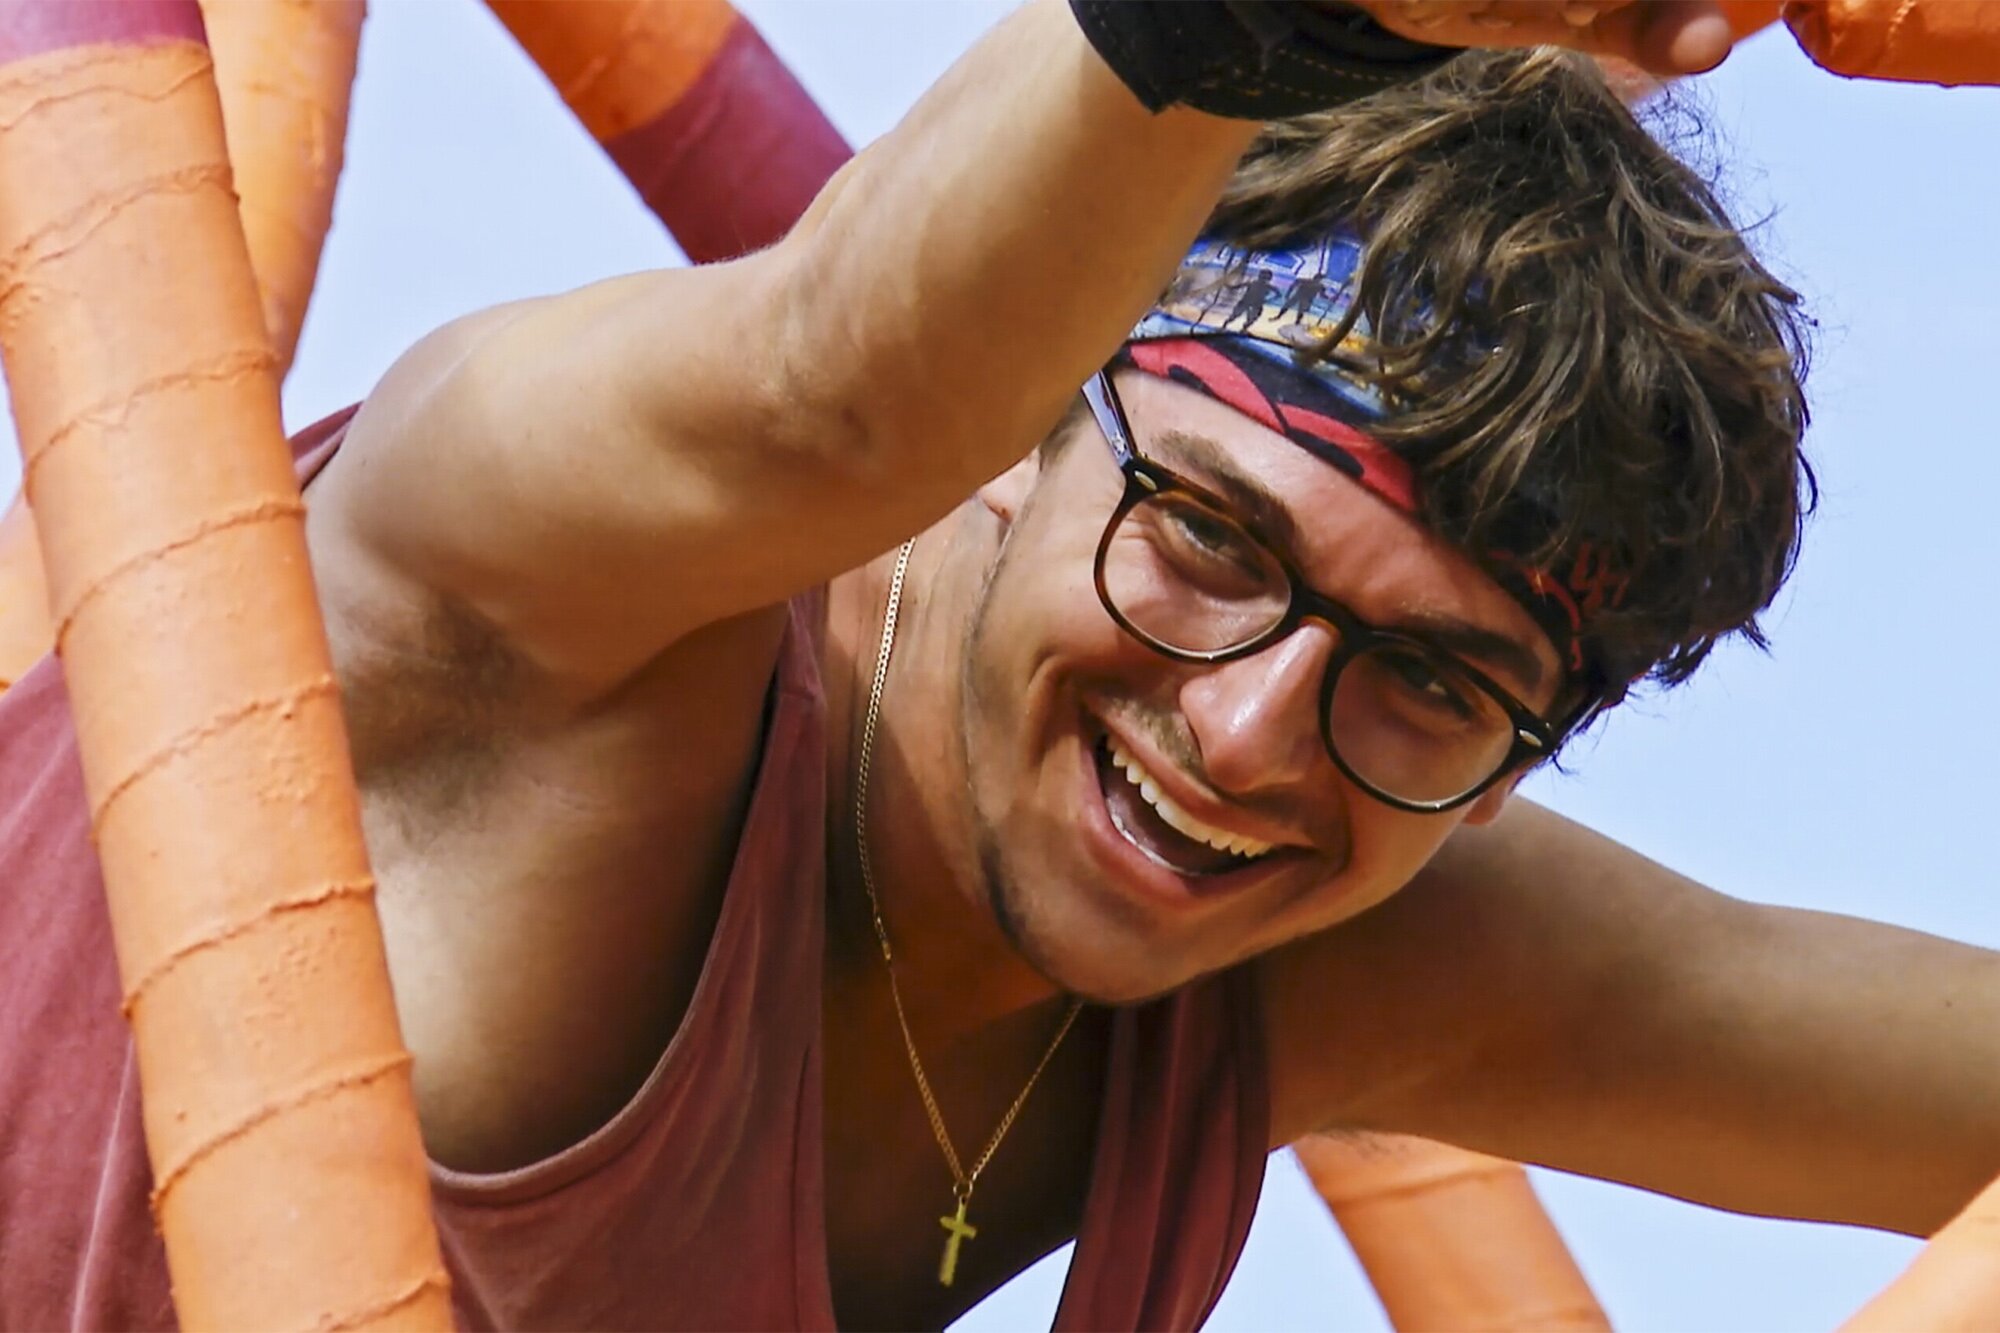 carson garrett admits he would not have helped yam yam at fire on survivor